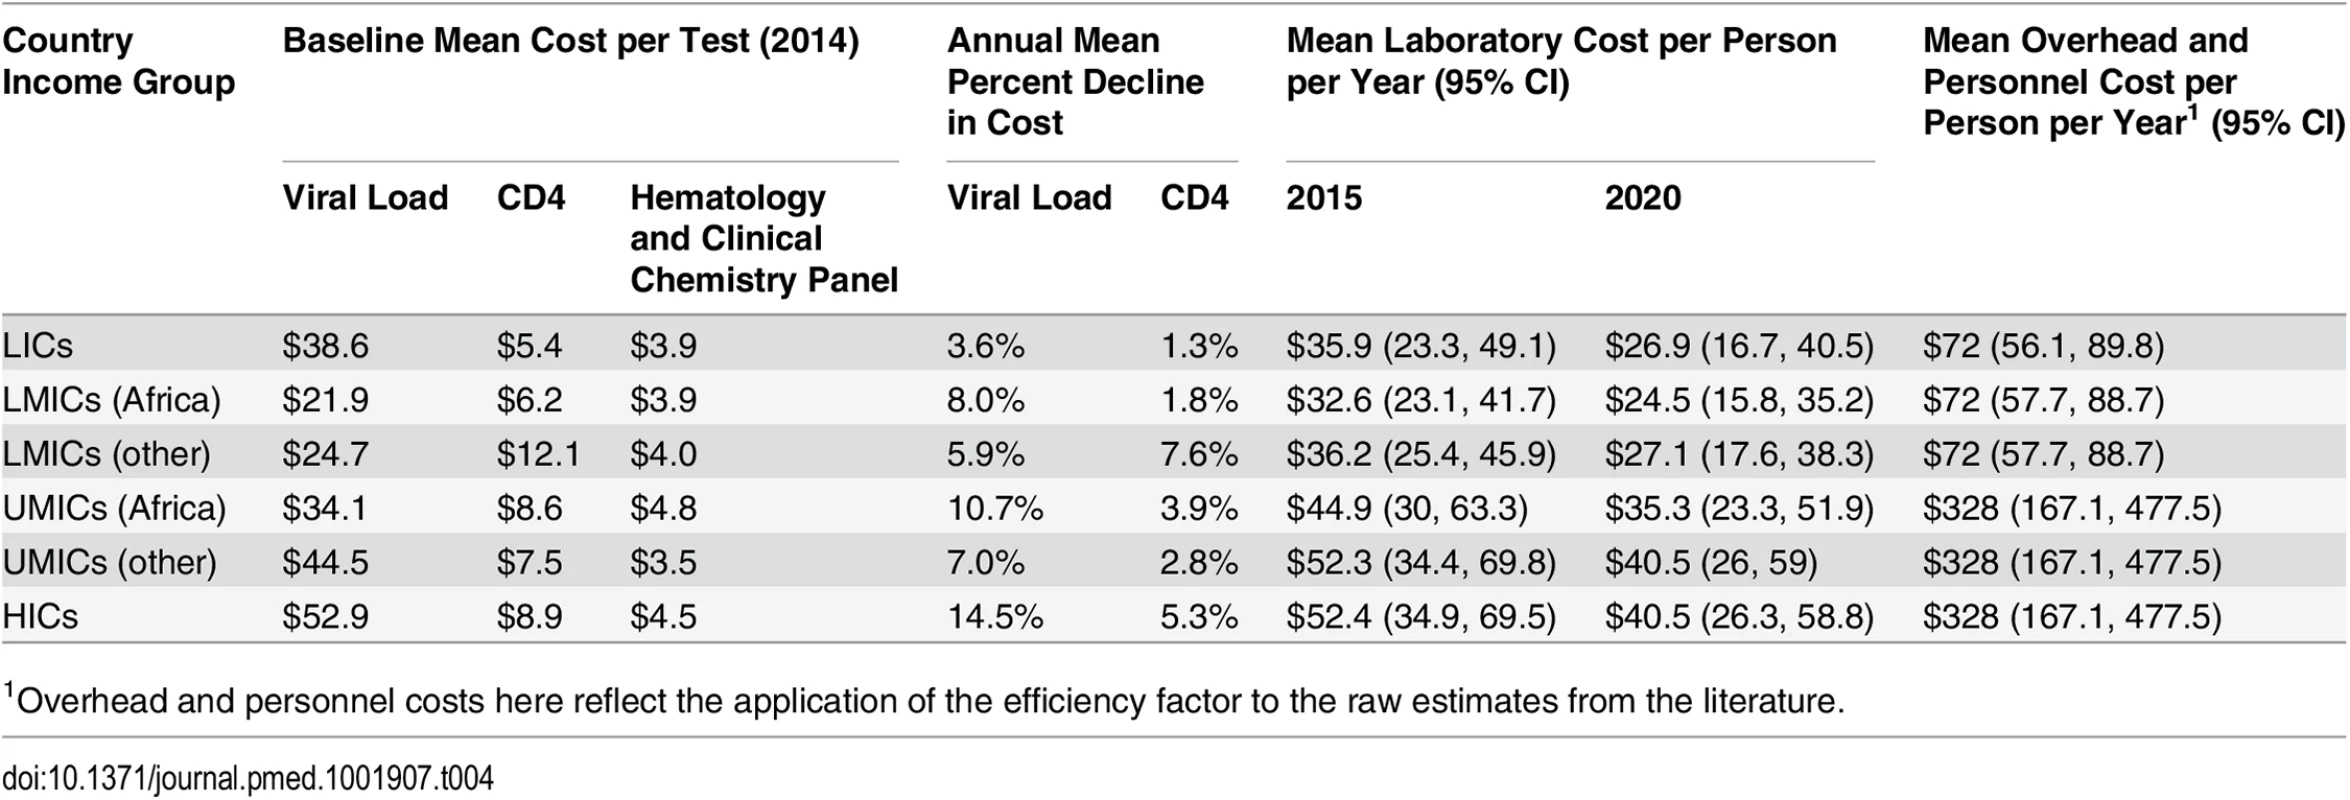 Simulated mean laboratory and overhead and personnel unit costs per person-year.